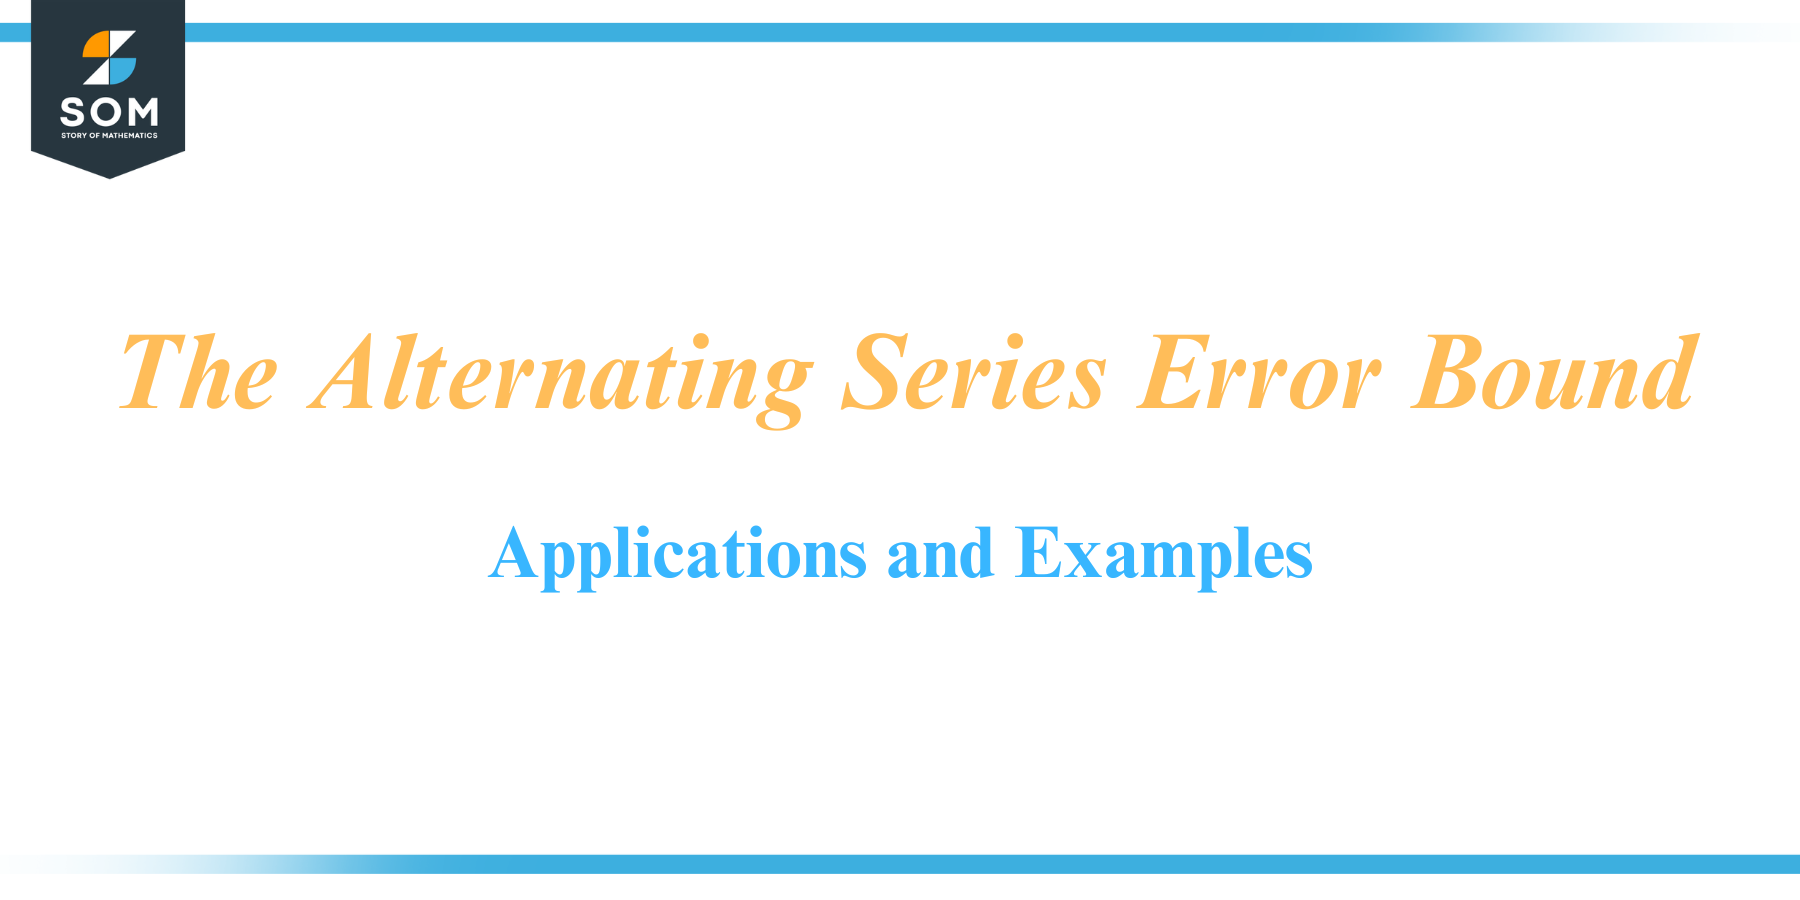 The Alternating Series Error Bound Applications and